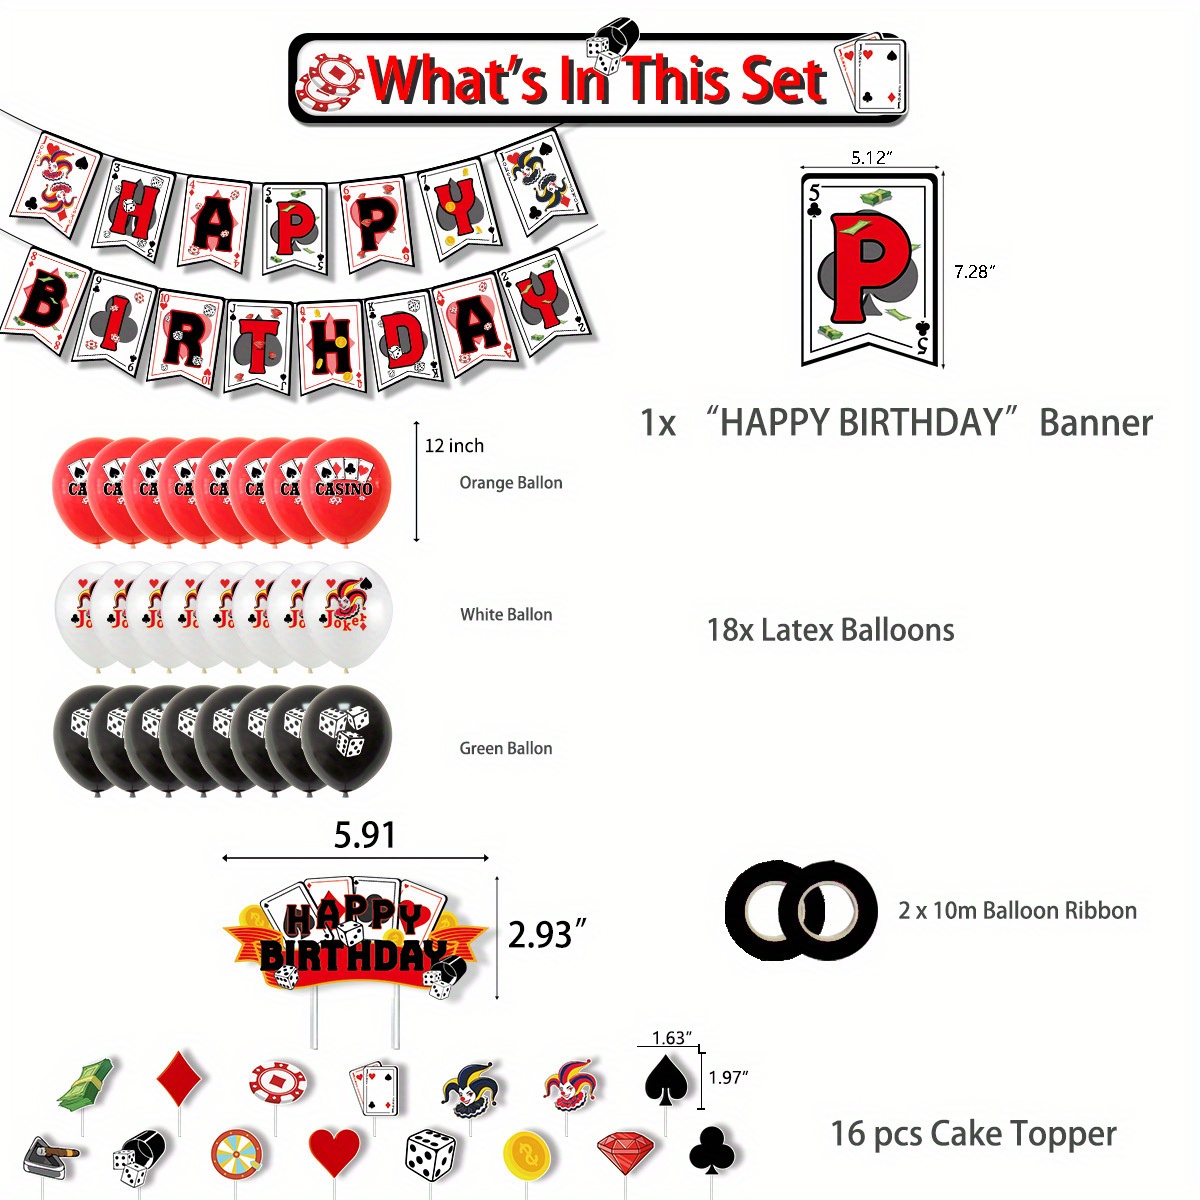 Casino Party Decoration Supplies, Casino Theme Party Decorations